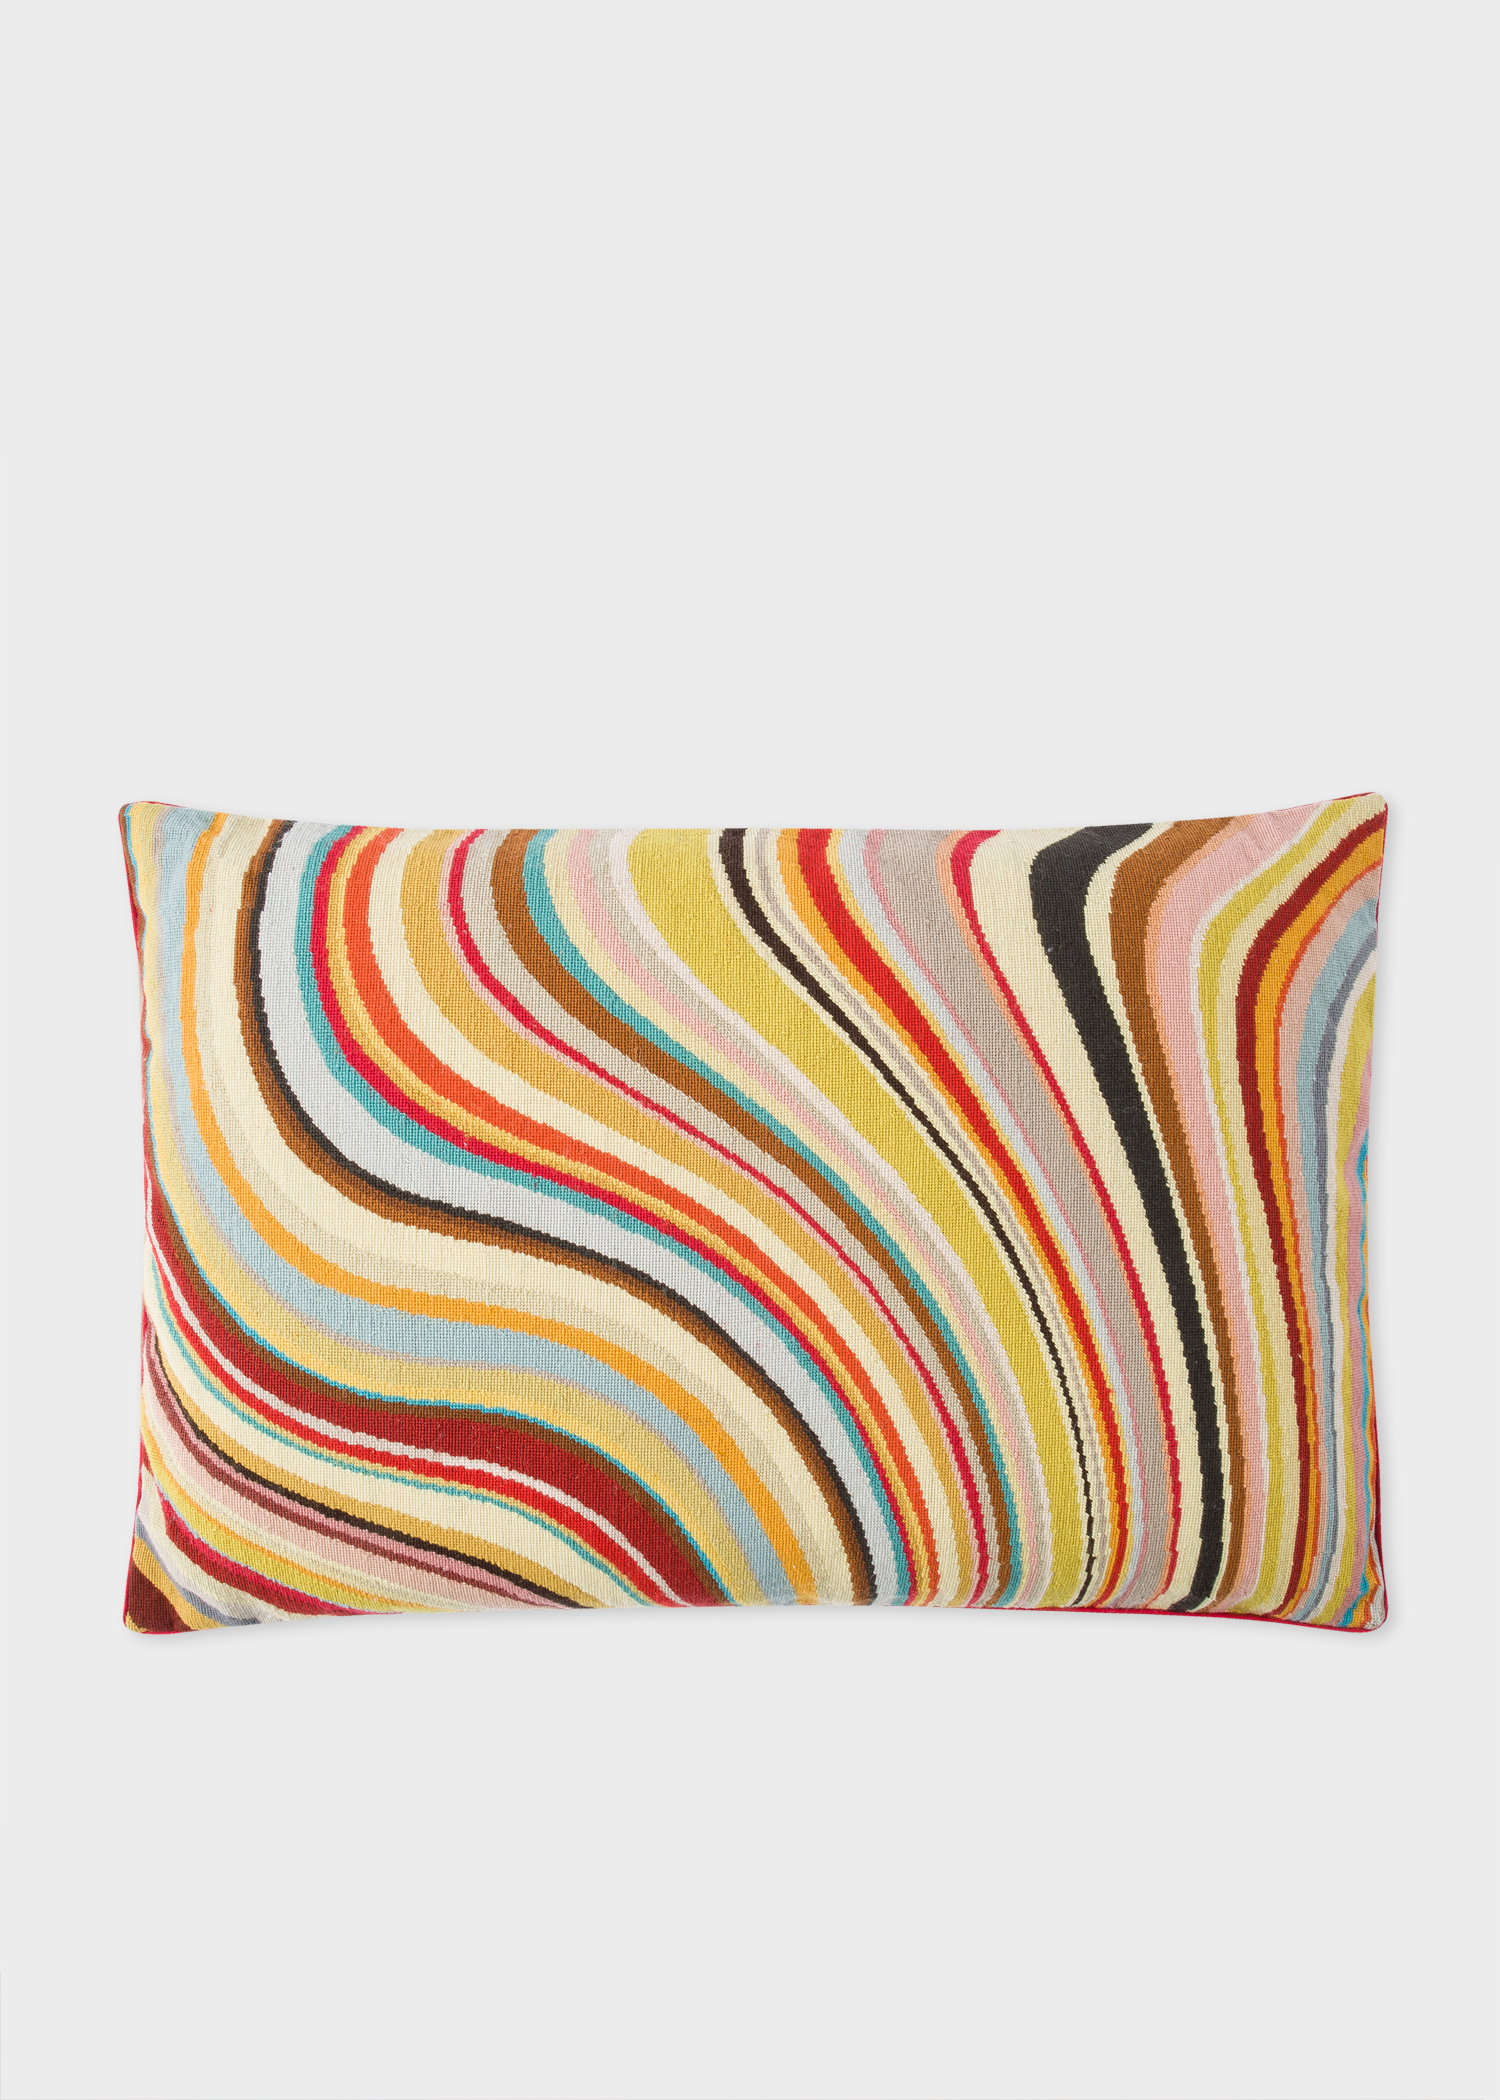 Front view - Paul Smith for The Rug Company - Swirl Wool Tapestry Cushion